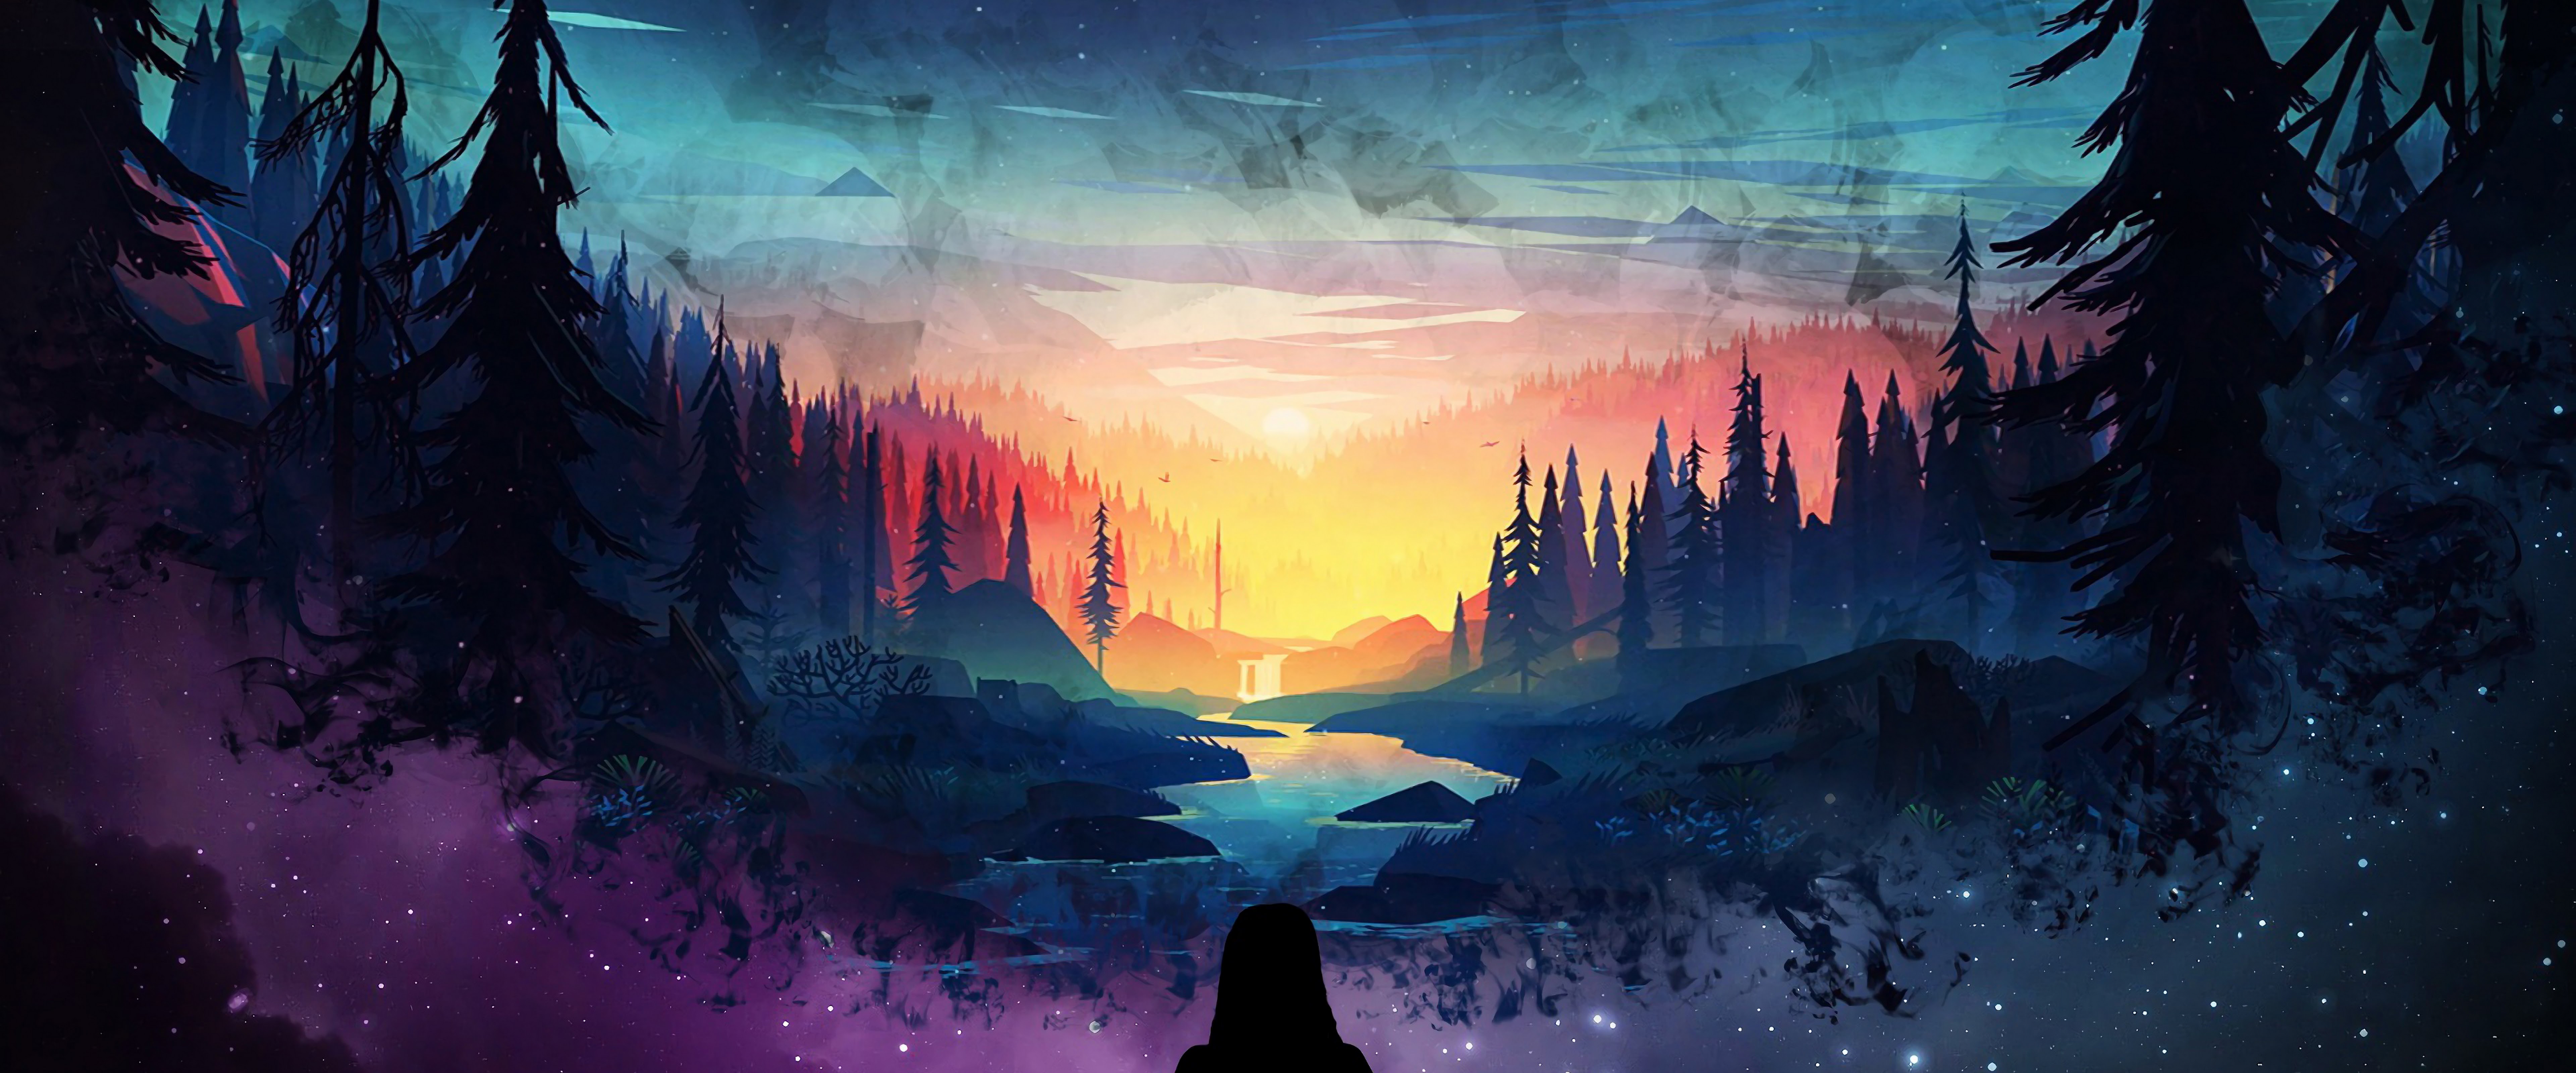 Forest Art Wallpapers